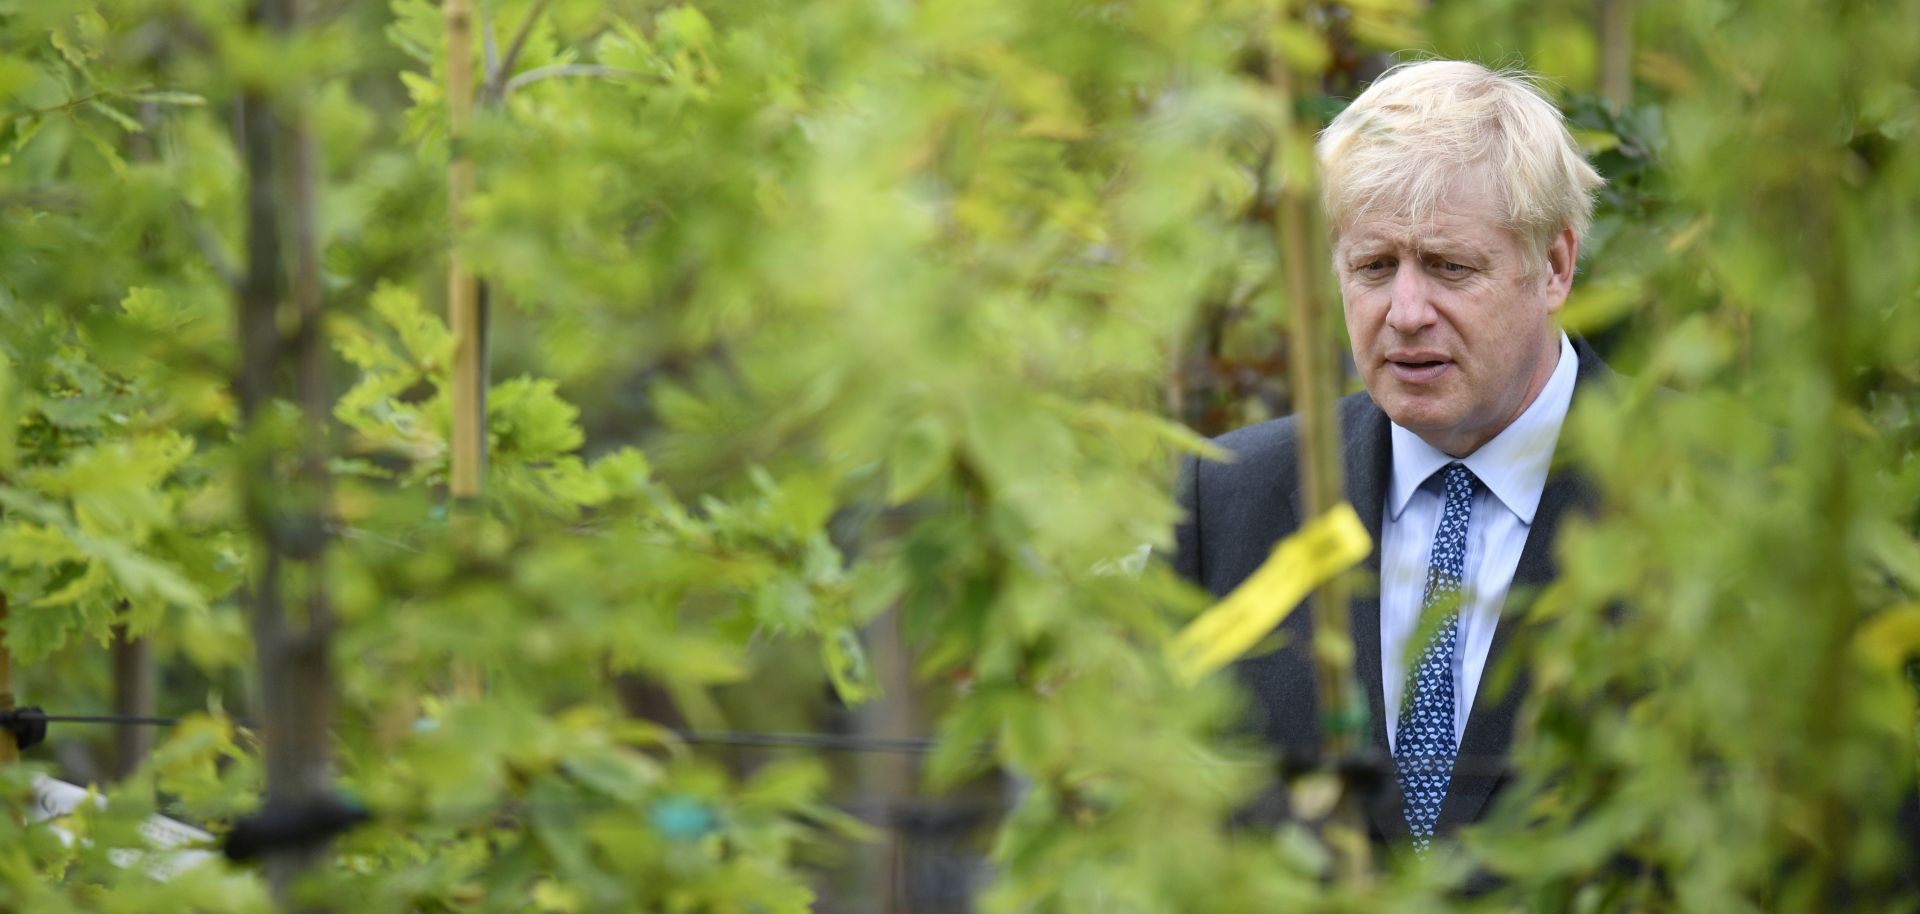 Boris Johnson is the new British prime minister. But that doesn't mean he can or will trigger a no-deal Brexit.